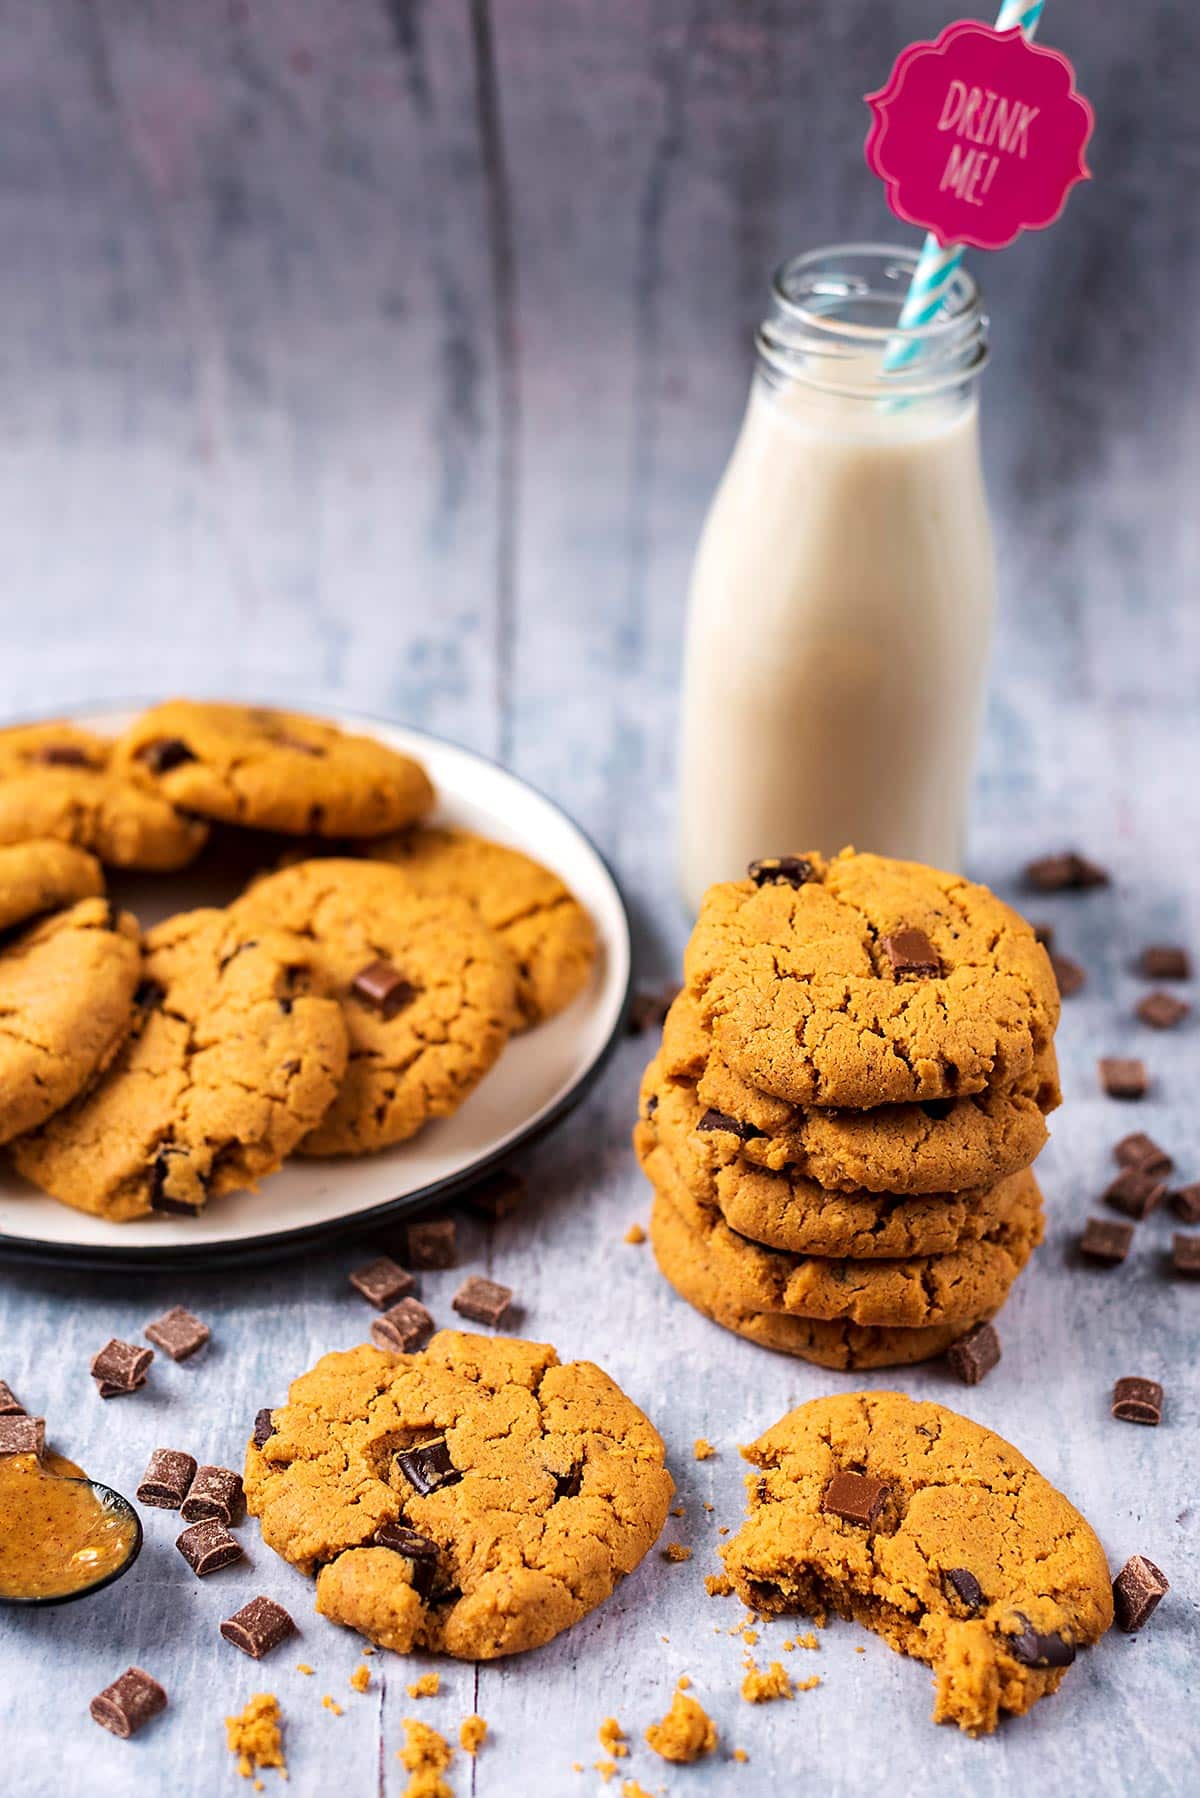 A plate of chocolate chip cookies next to a stack of more cookies and a bottle of milk